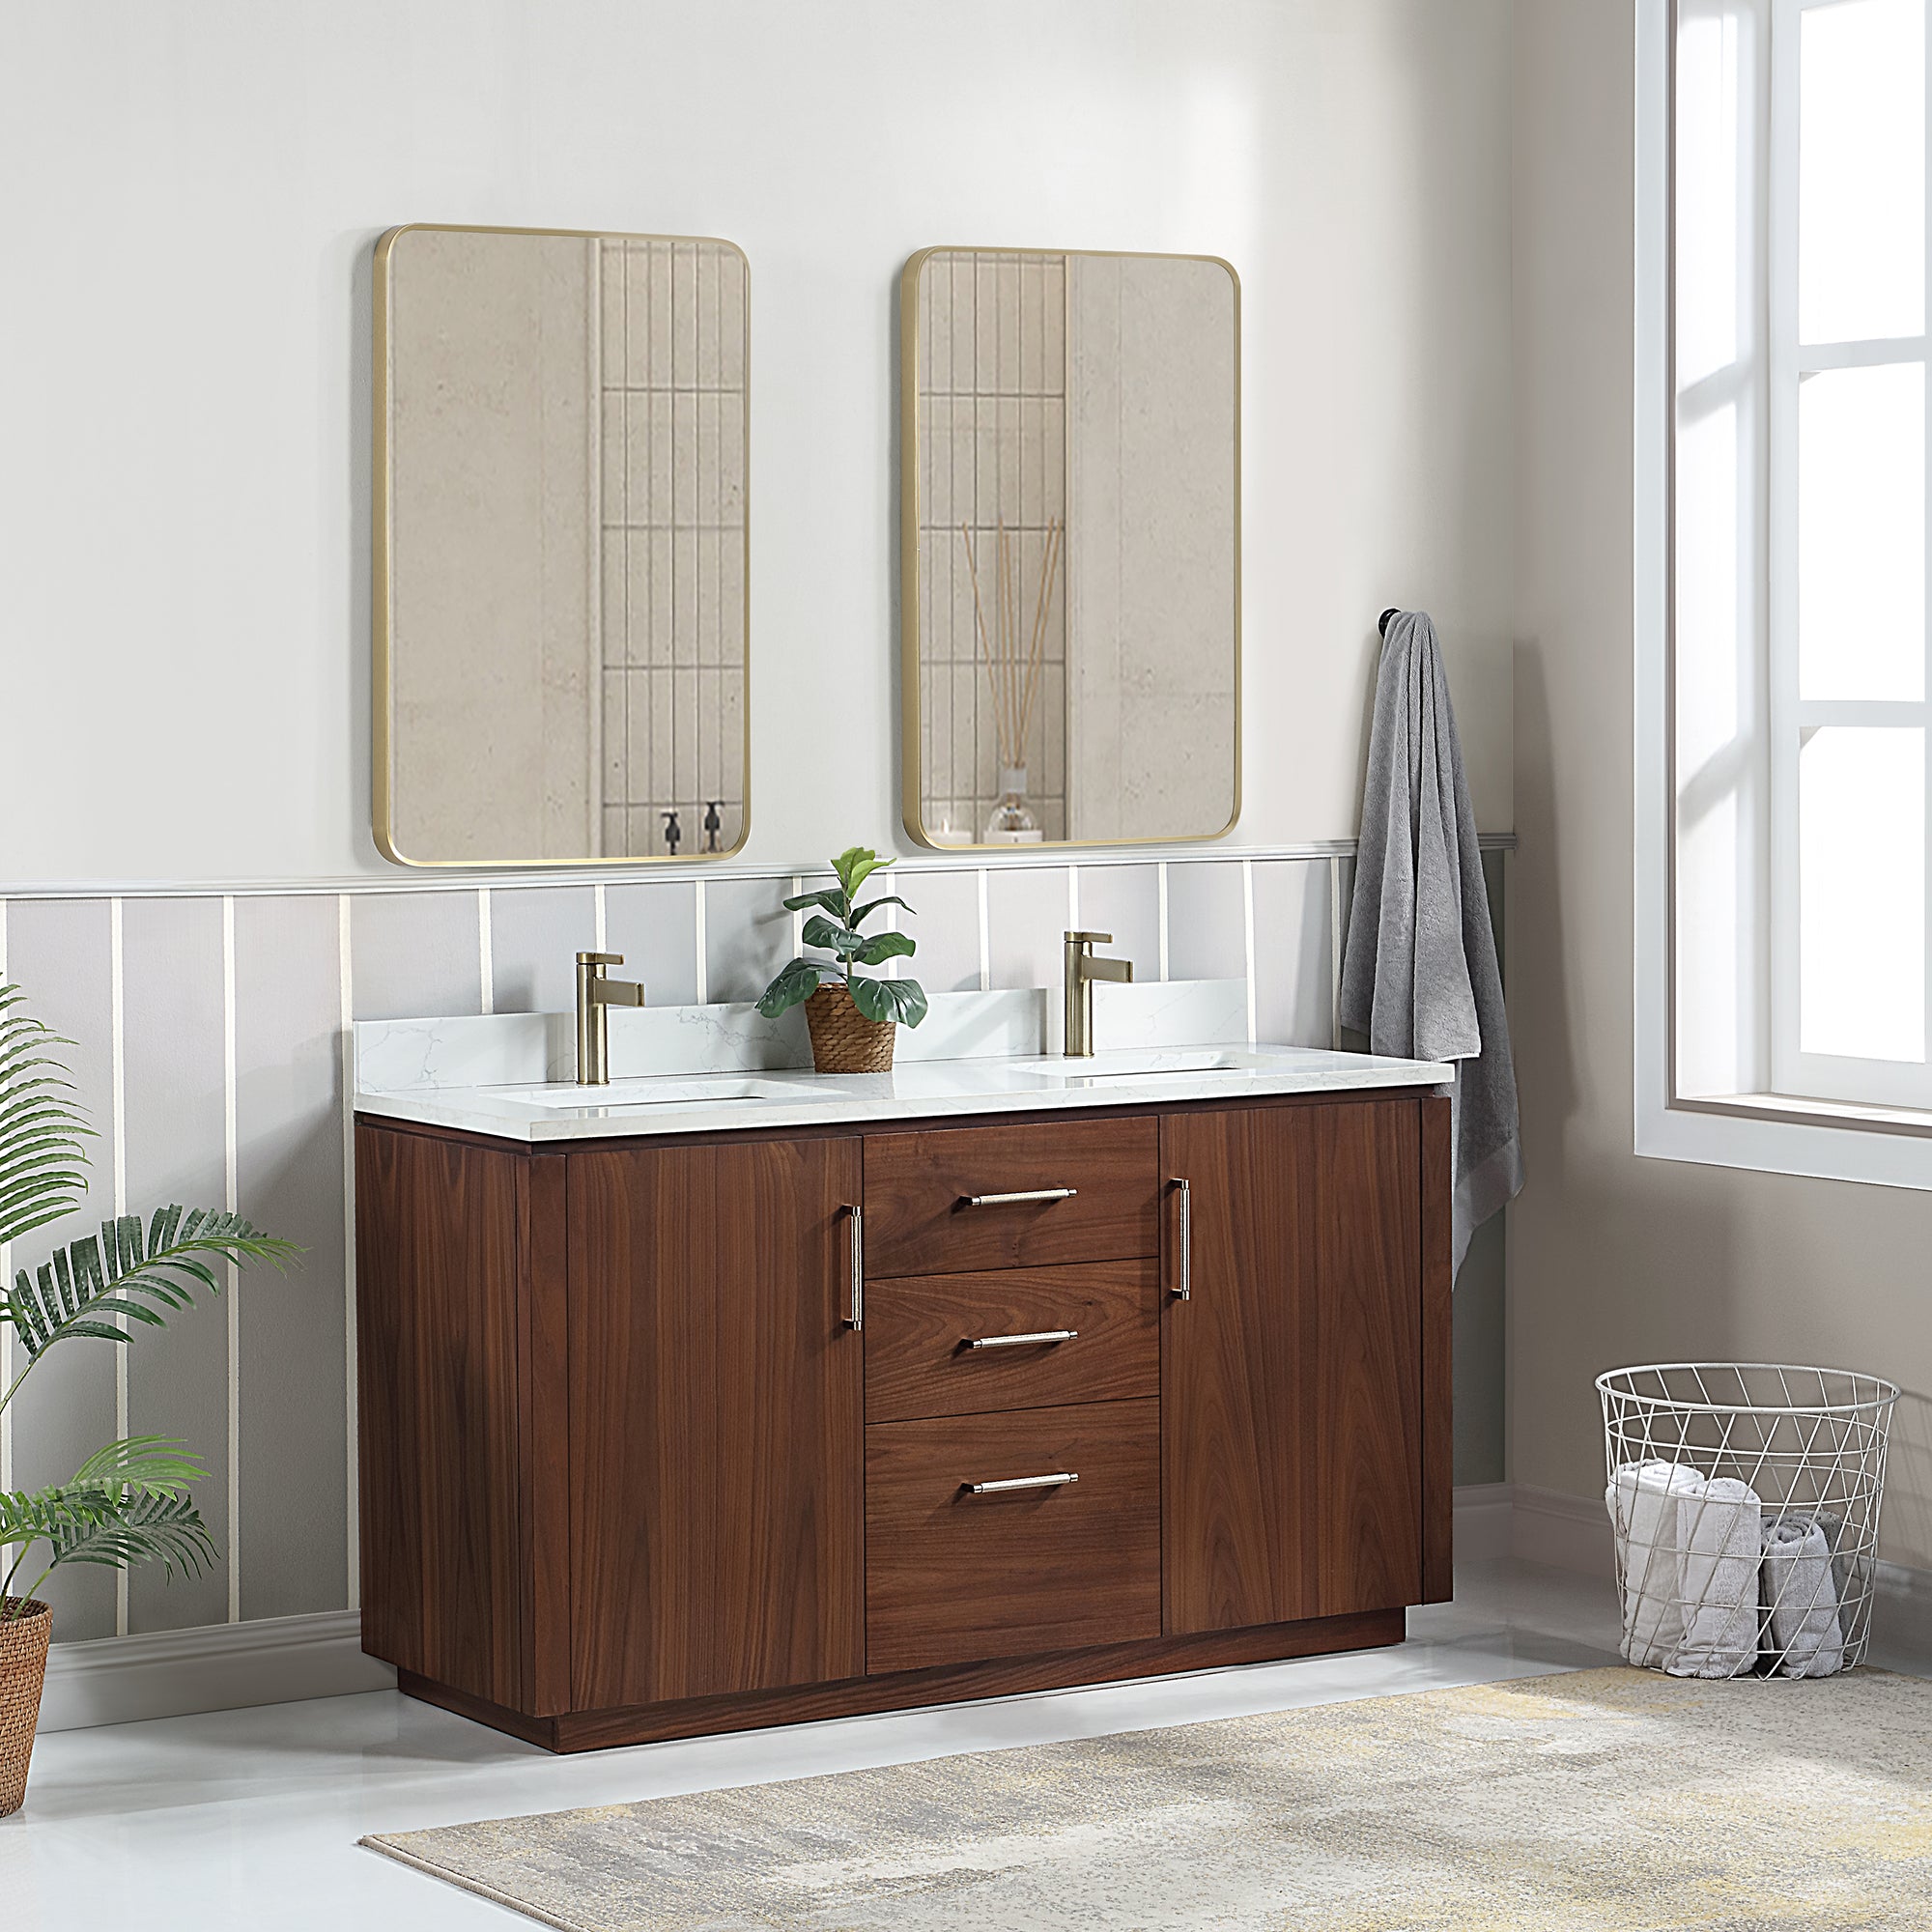 San 60M" Free-standing Double Bath Vanity in Natural Walnut with White Grain Composite Stone Top